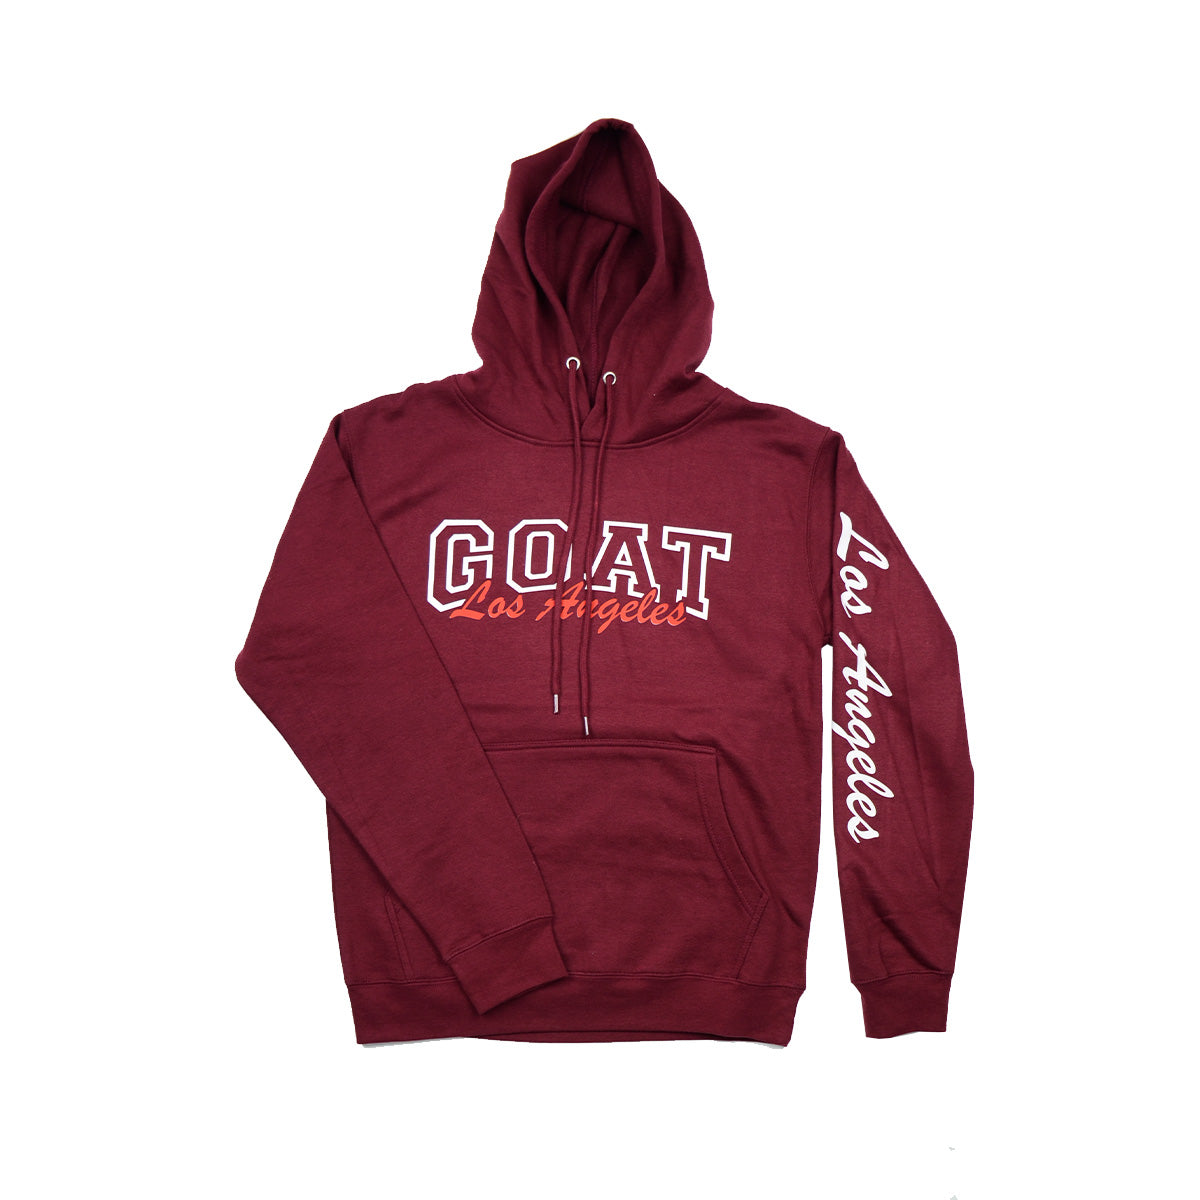 6 Pieces Pack of Burgundy Hoodie "GOAT" 1S-2M-2L-1XL